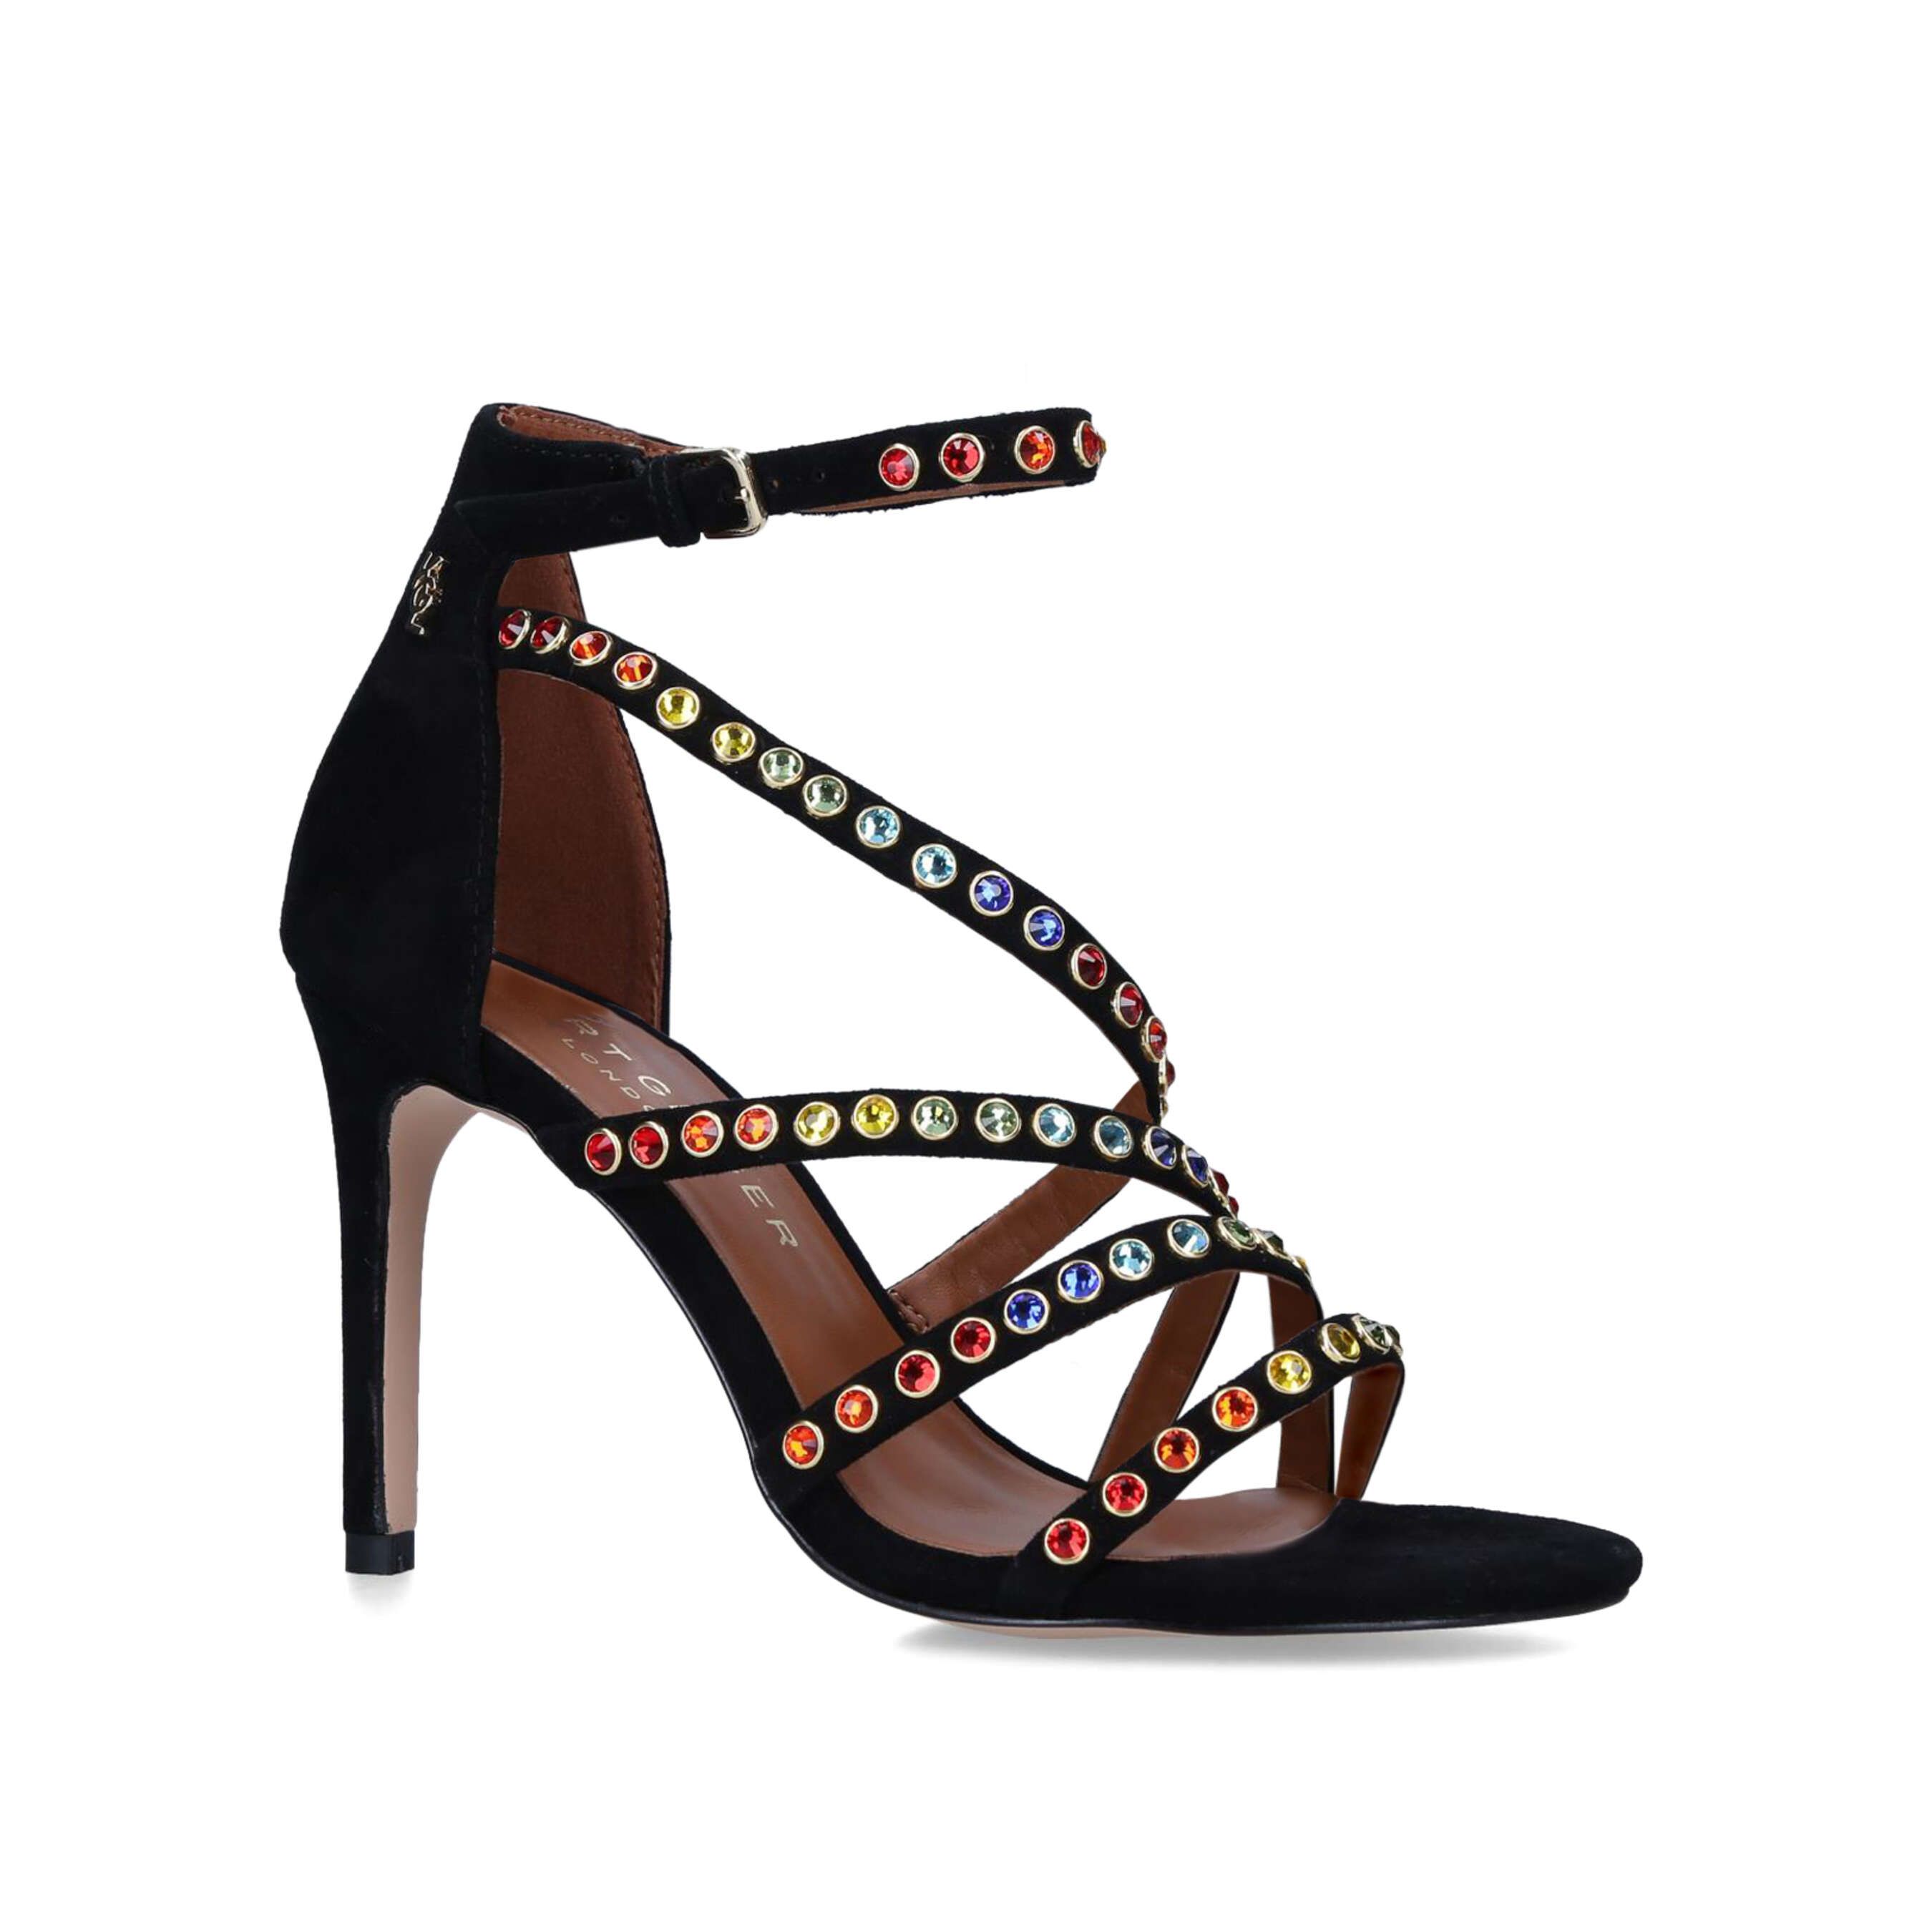 The KGL Hyde Em Sandal features a black leather upper with multi-coloured crystals across the straps. The ankle is fastened with small gold buckle.